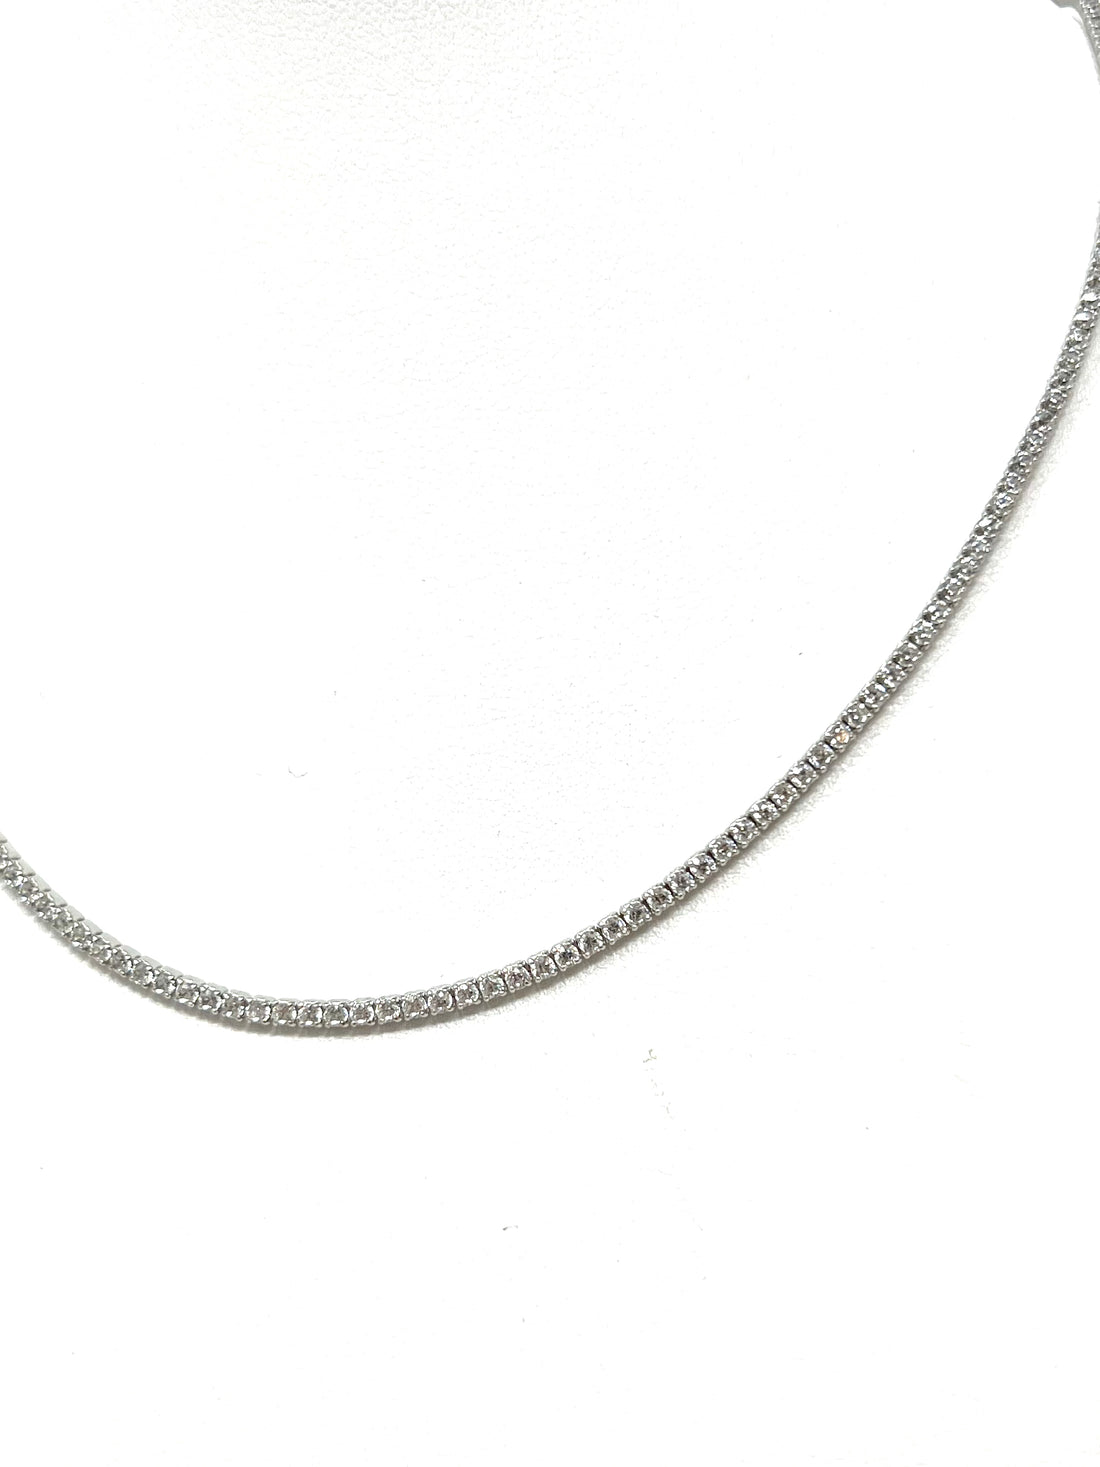 April Tennis Necklace in Silver with Clear Stones